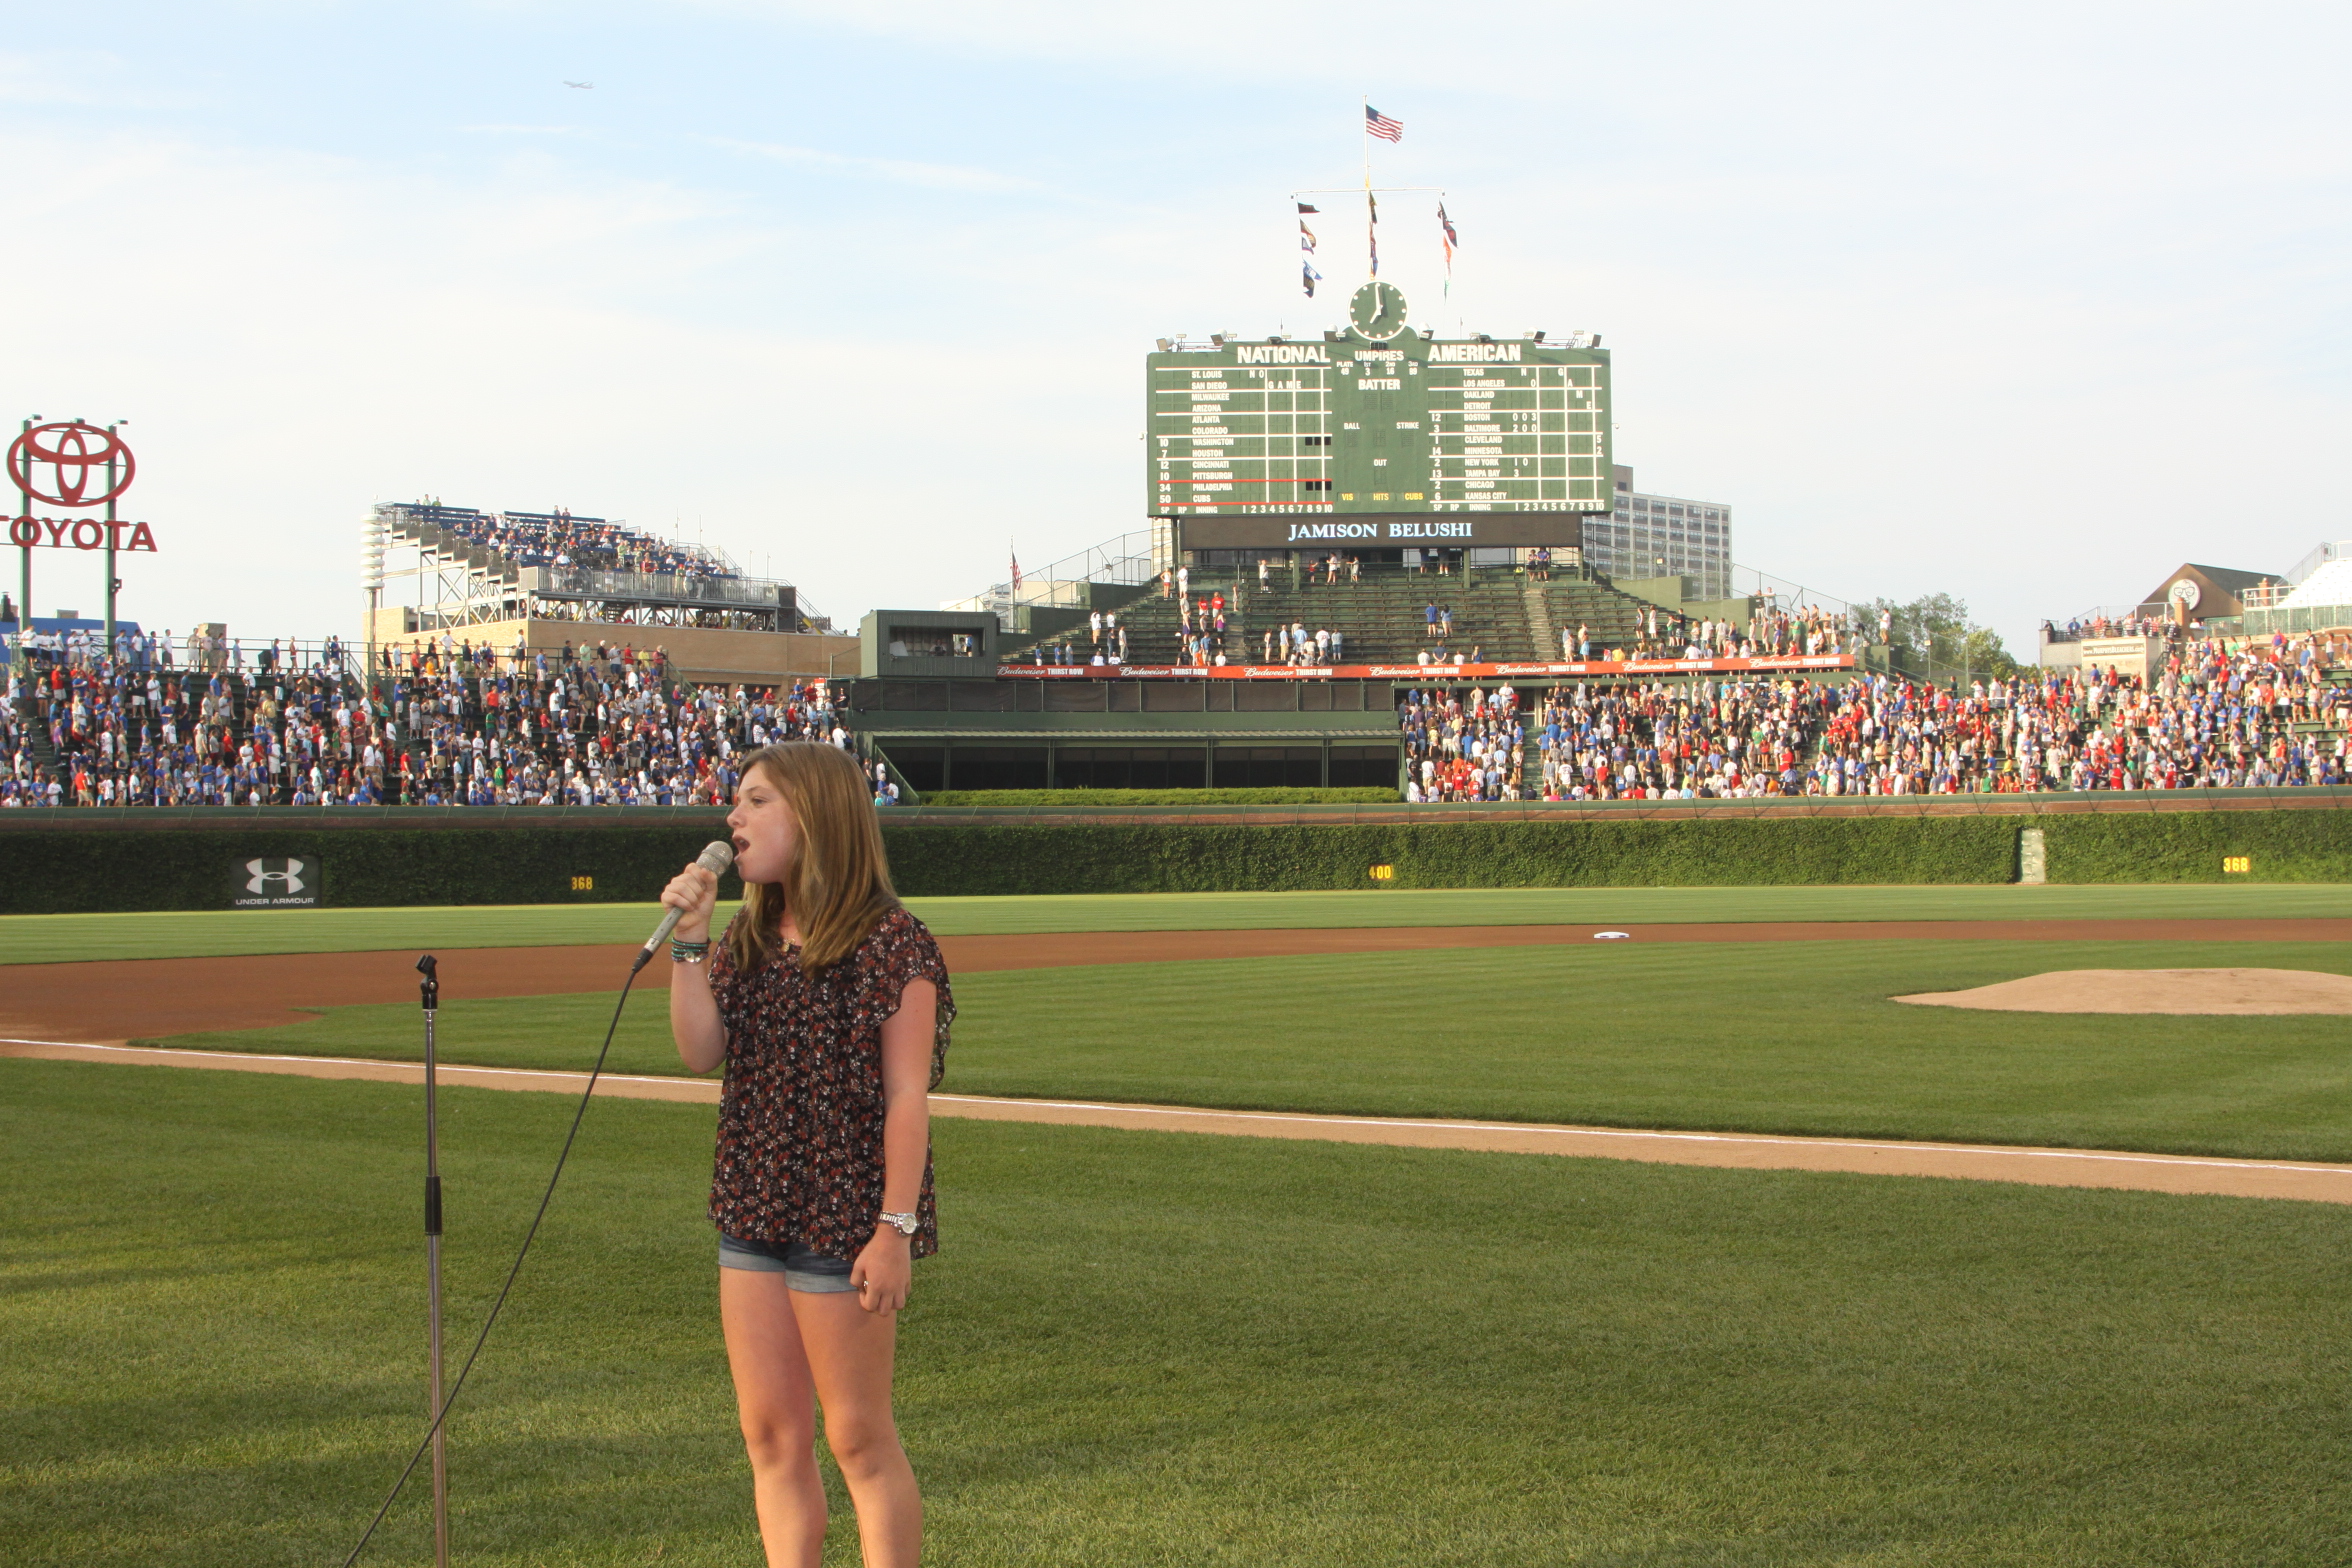 Jami sings the National Anthem at Wrigley Field.